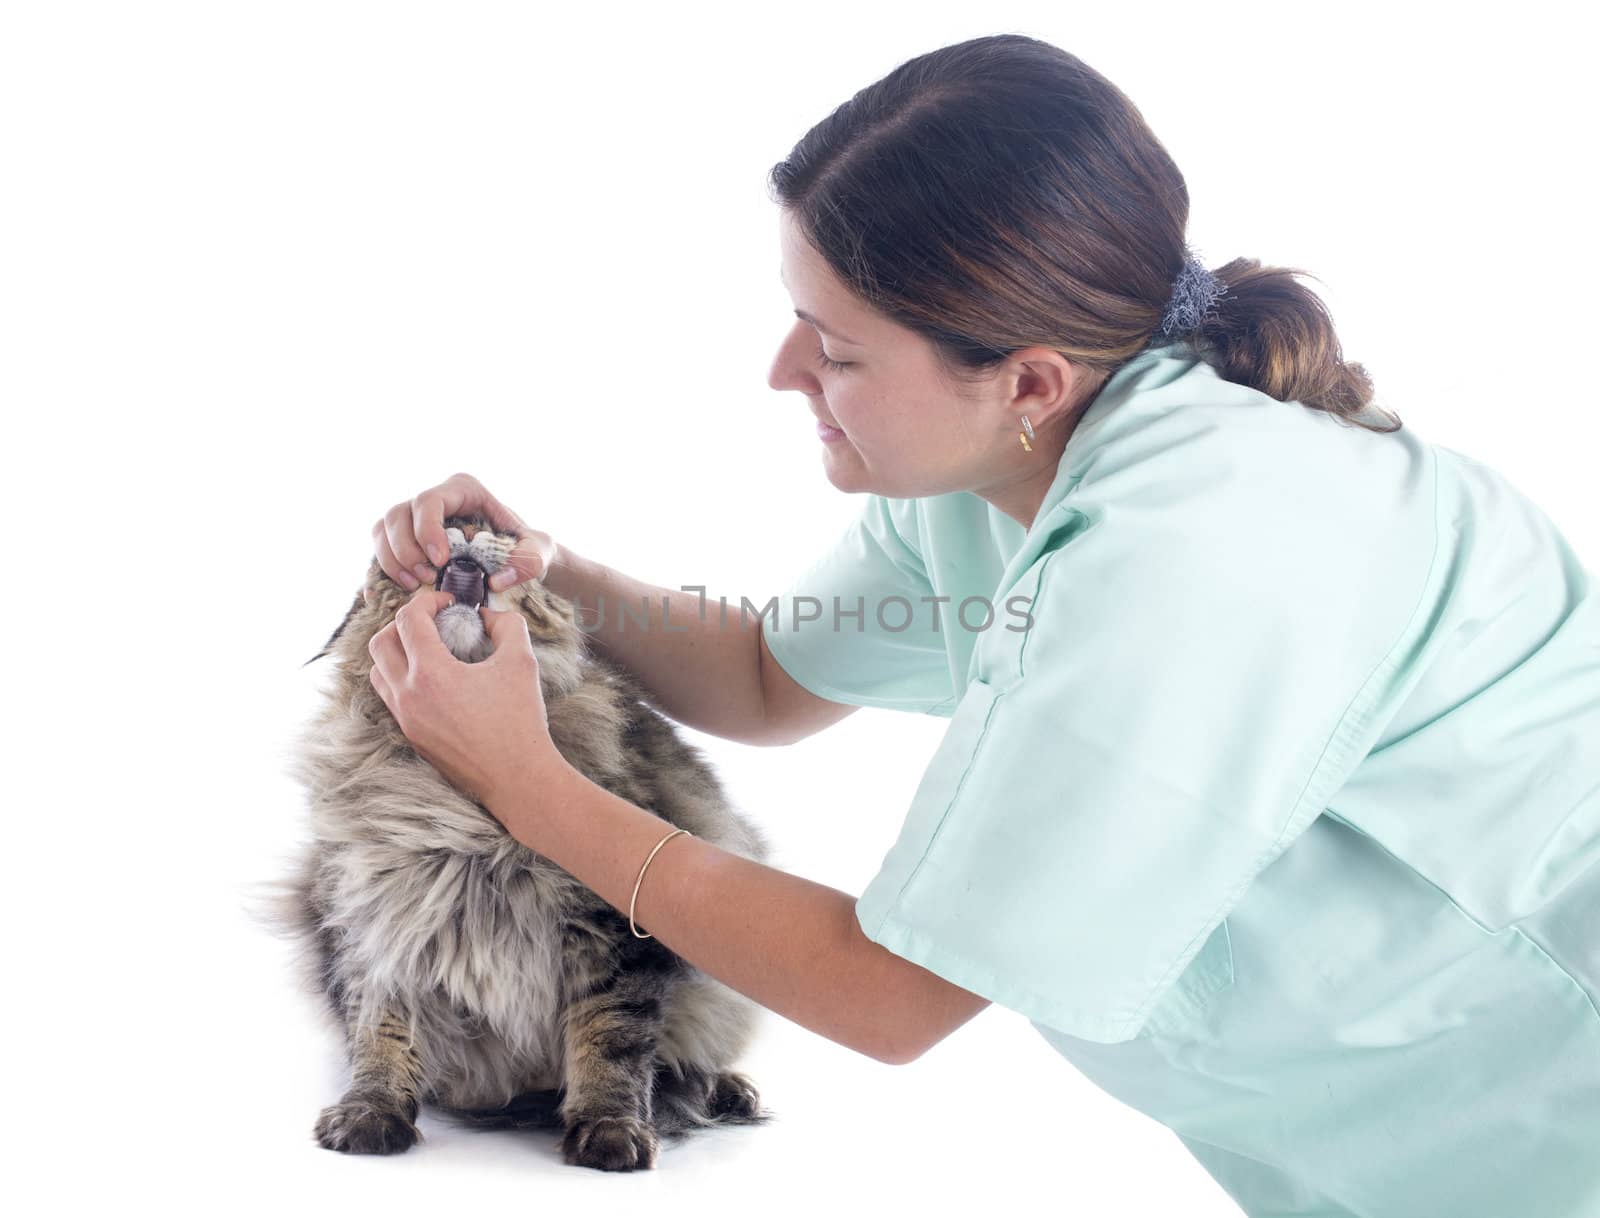 portrait of a purebred  maine coon cat and vet on a white background